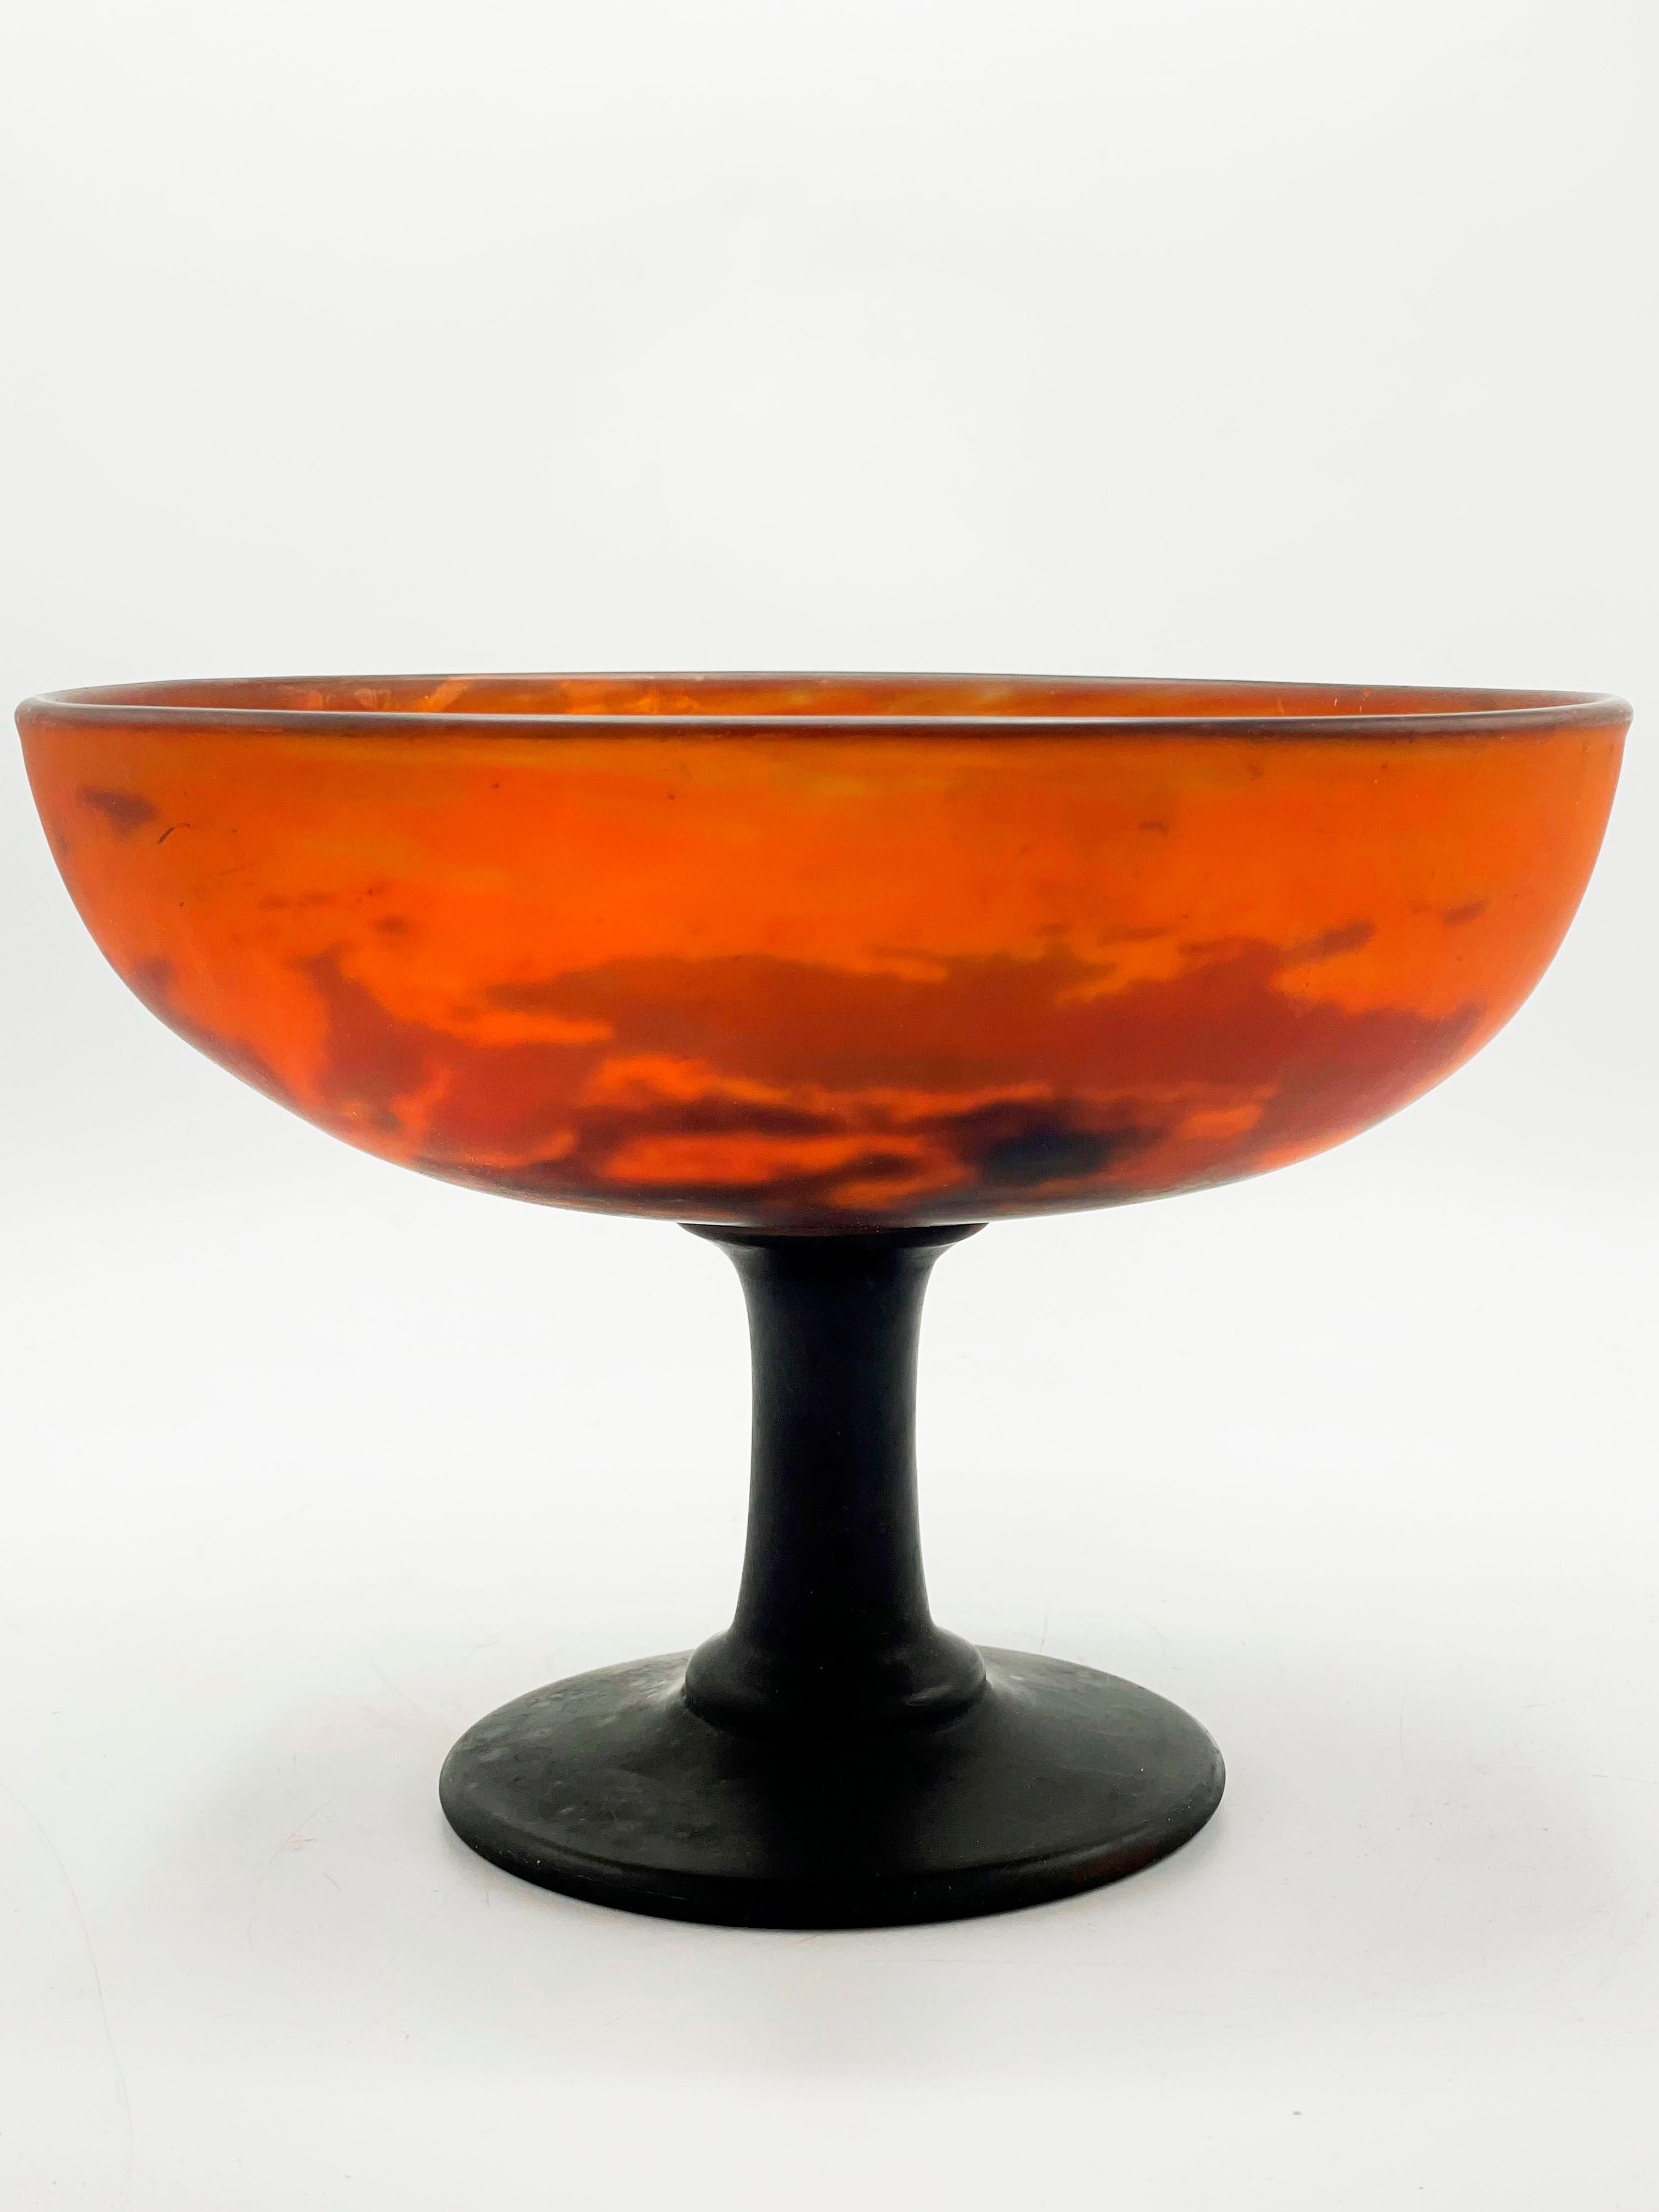 Art Glass Footed Muller Frères Bowl
France, around 1940.

It is a BEAUTIFUL centerpiece with a glass base.
Signed by Muller Freres Luneville, in yellow and light blue colors (see photos).
Pâté de verre (glass paste).

Totally in Art Deco taste and